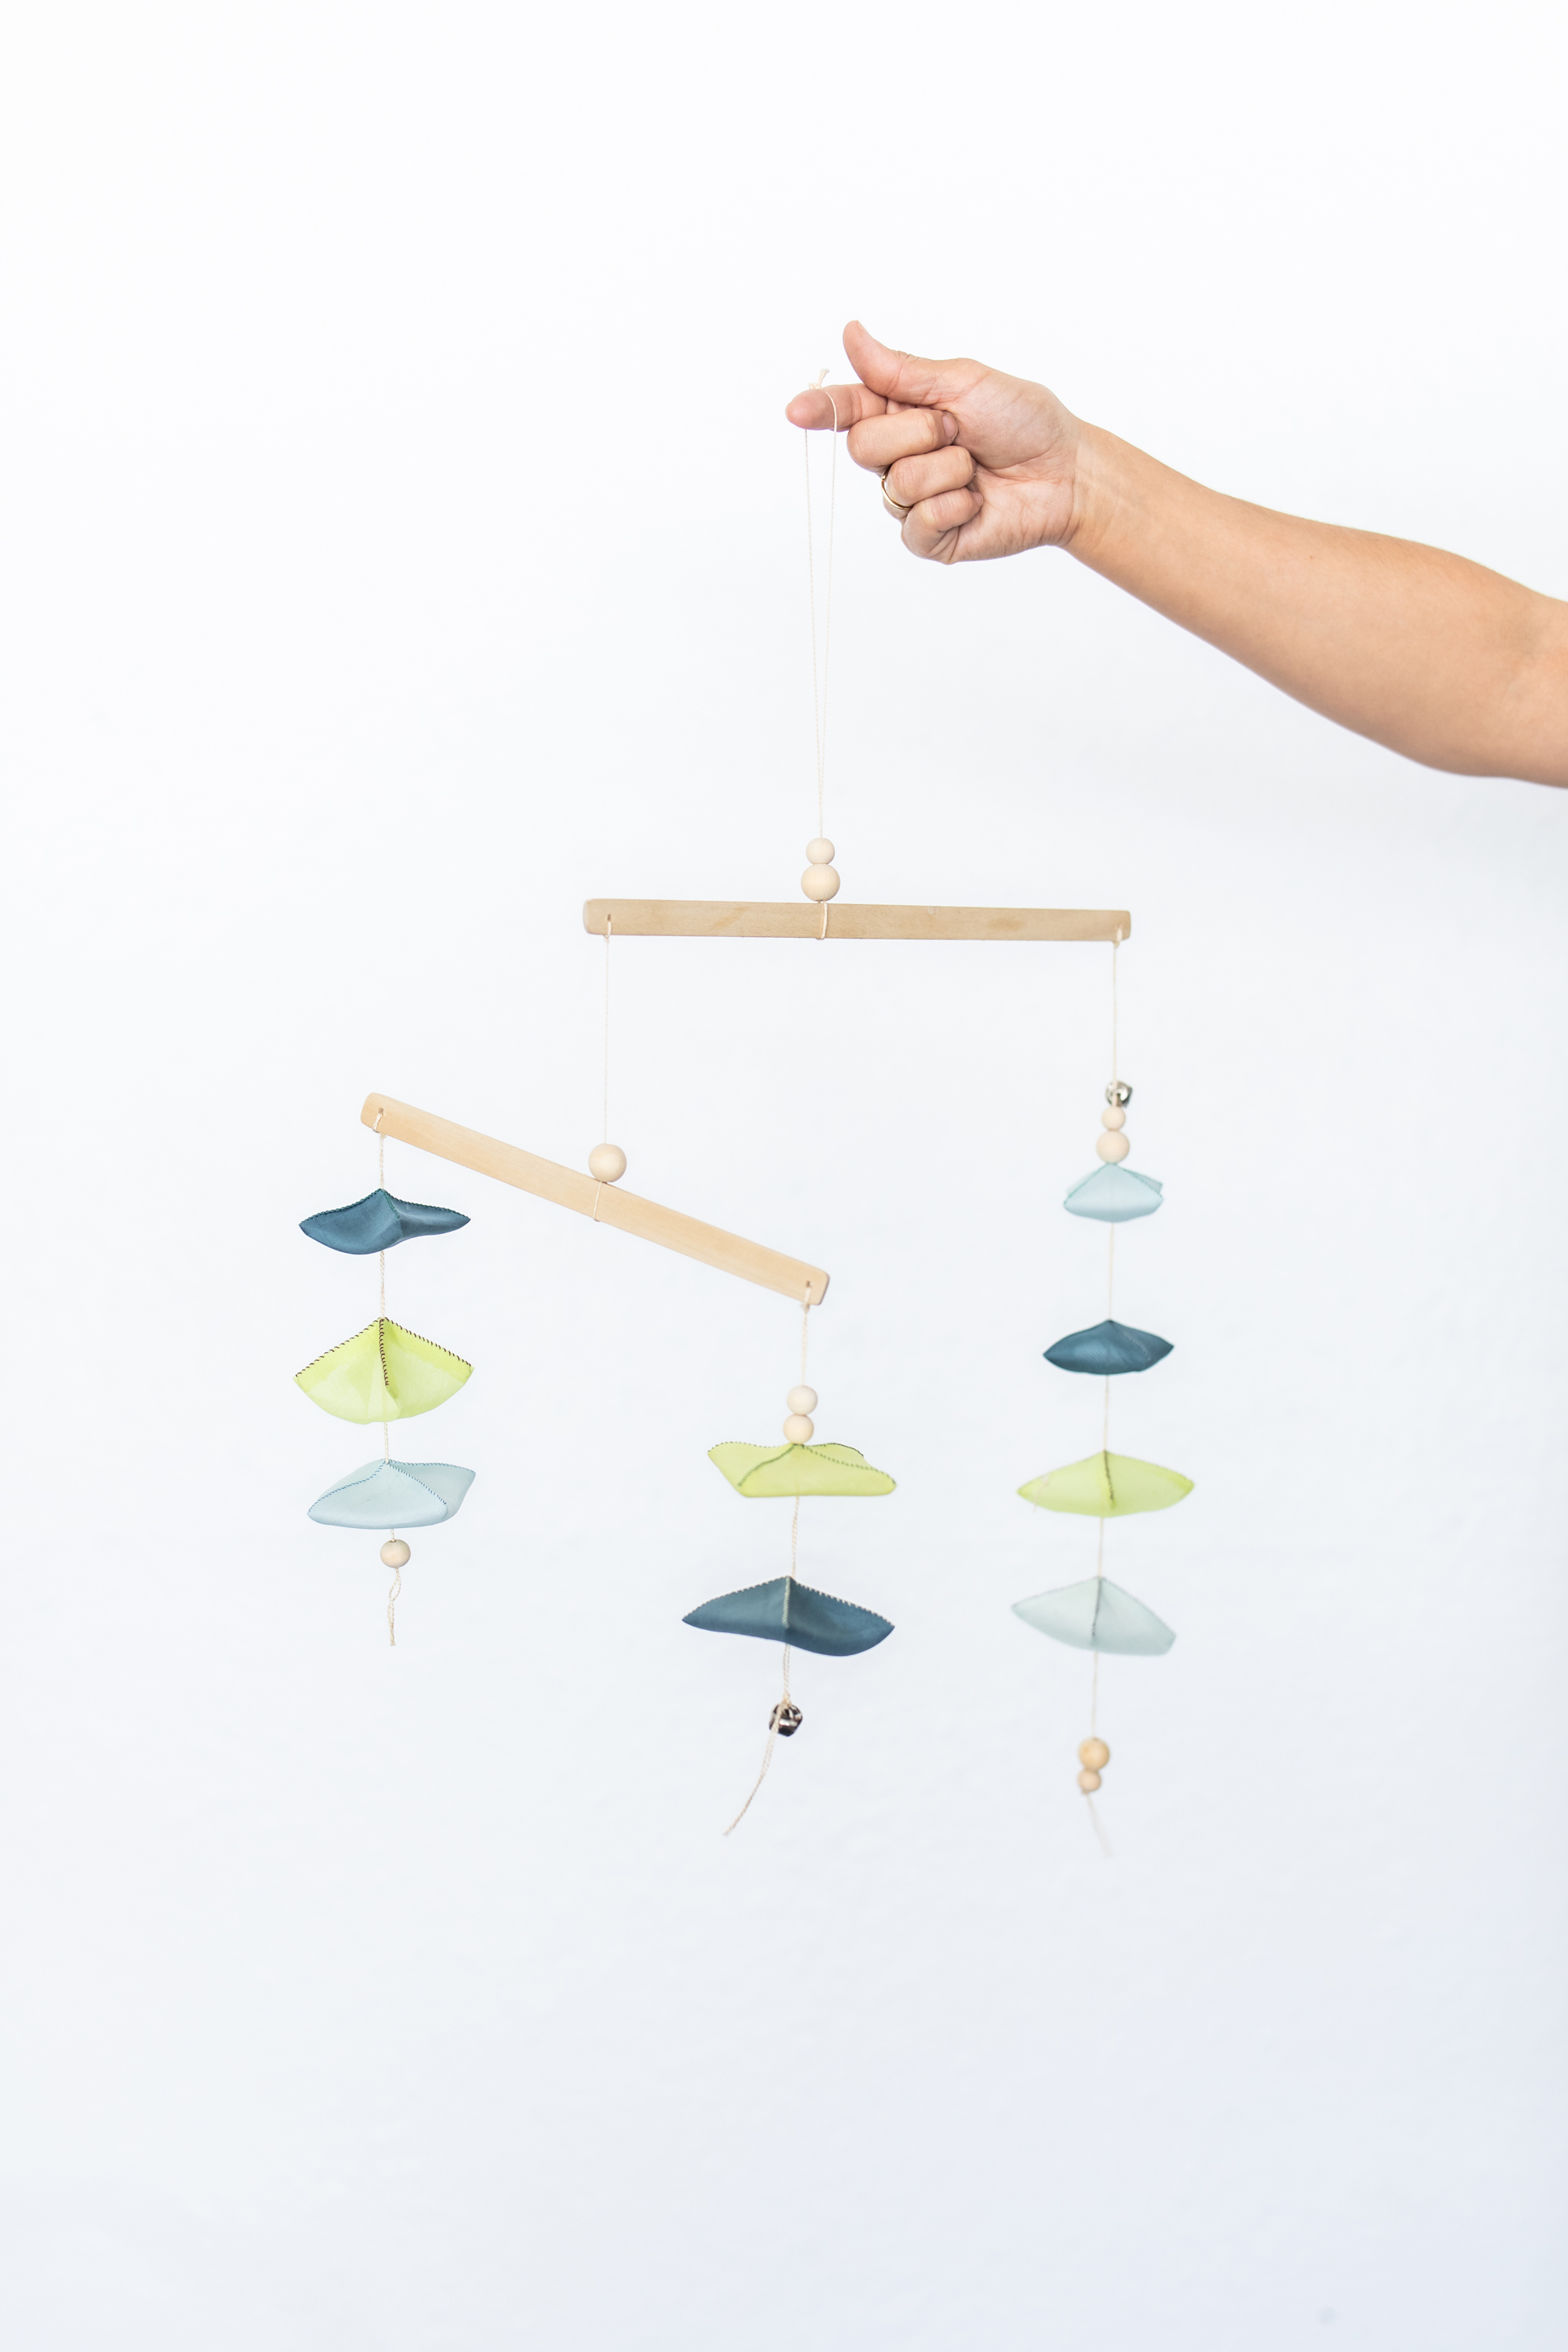 Suspended Oksa Chimes Workshop with Youngmin Lee